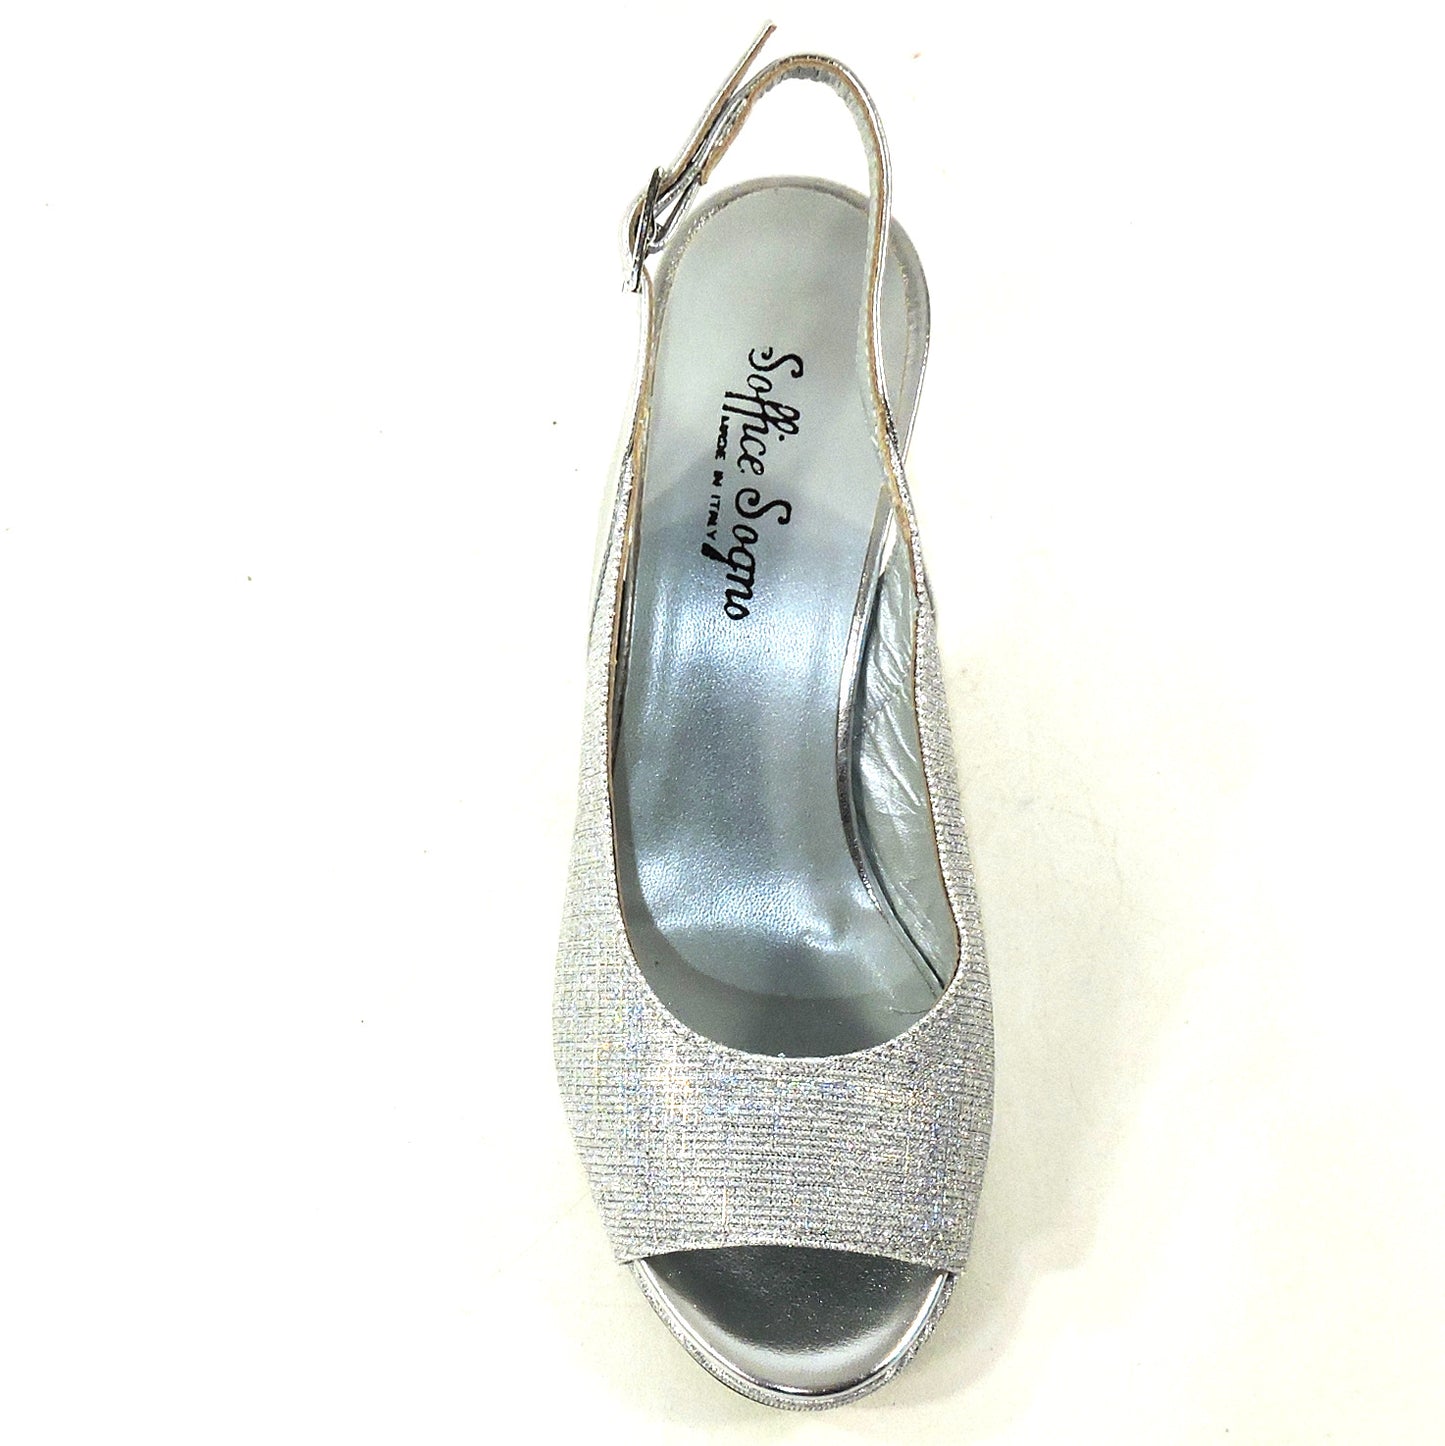 SOFFICE SOGNO 🇮🇹 WOMEN'S SILVER LEATHER COMFORT FASHION SANDALS